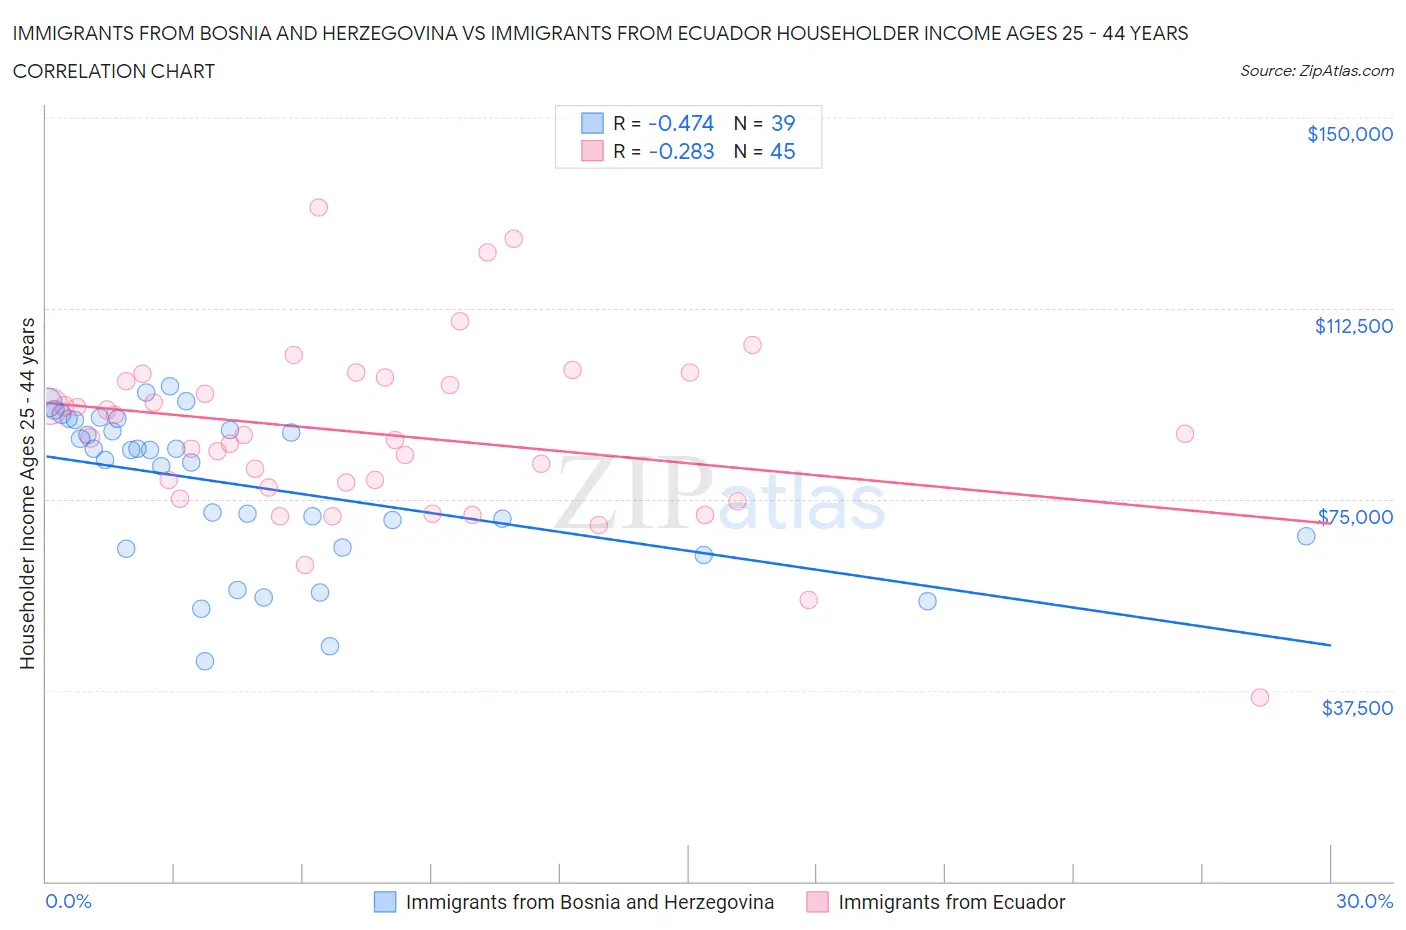 Immigrants from Bosnia and Herzegovina vs Immigrants from Ecuador Householder Income Ages 25 - 44 years